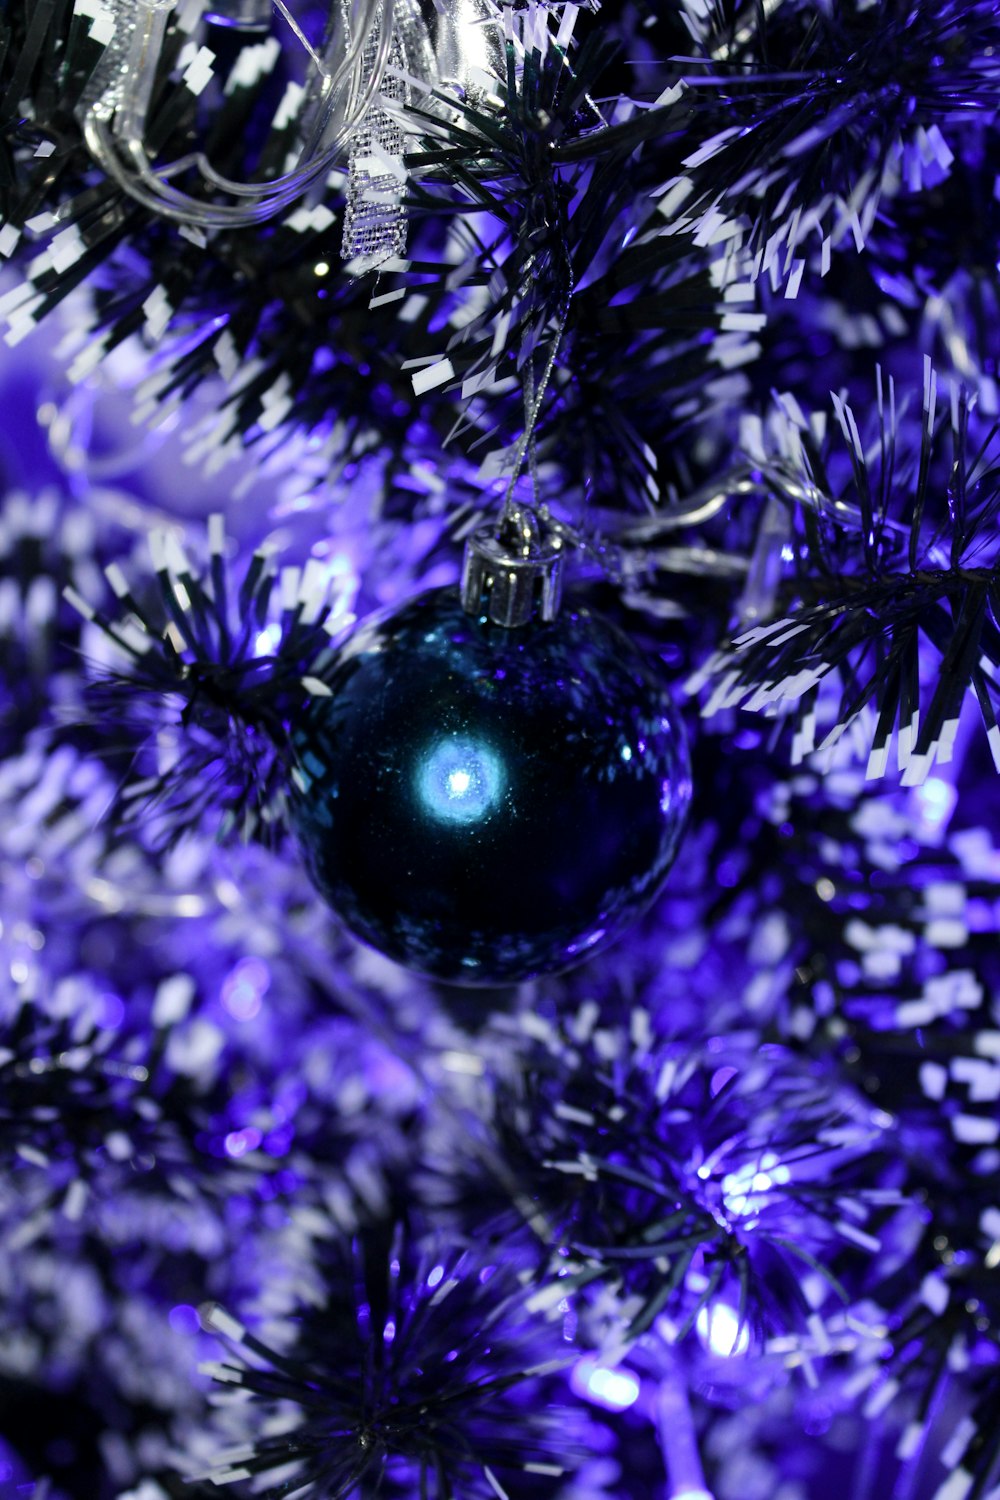 blue bauble in front of purple tinsel